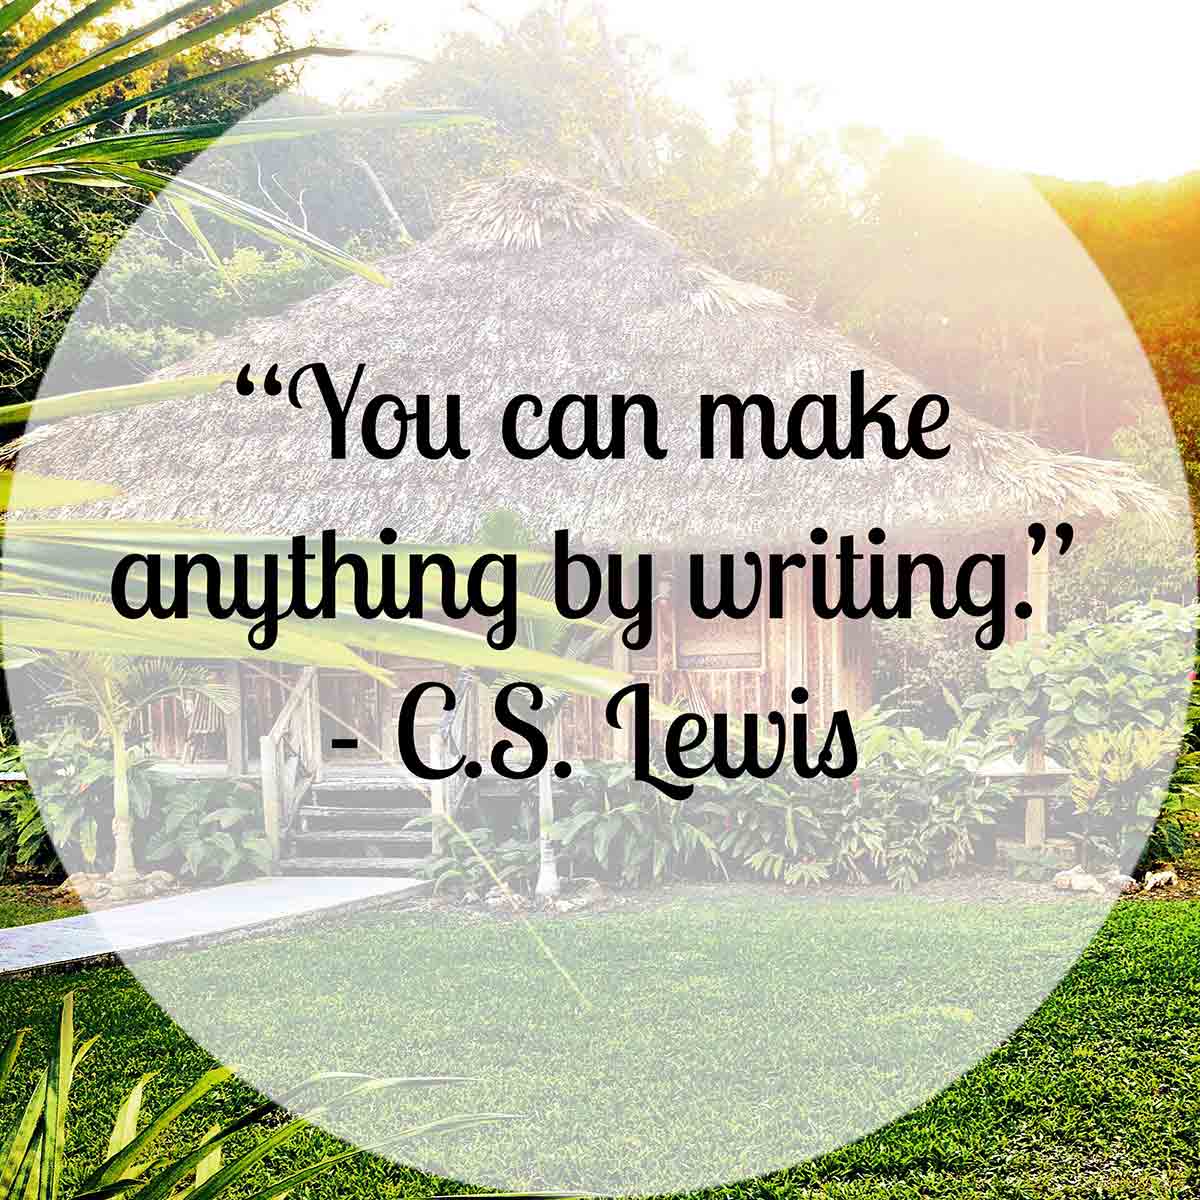 you can make anything by writing